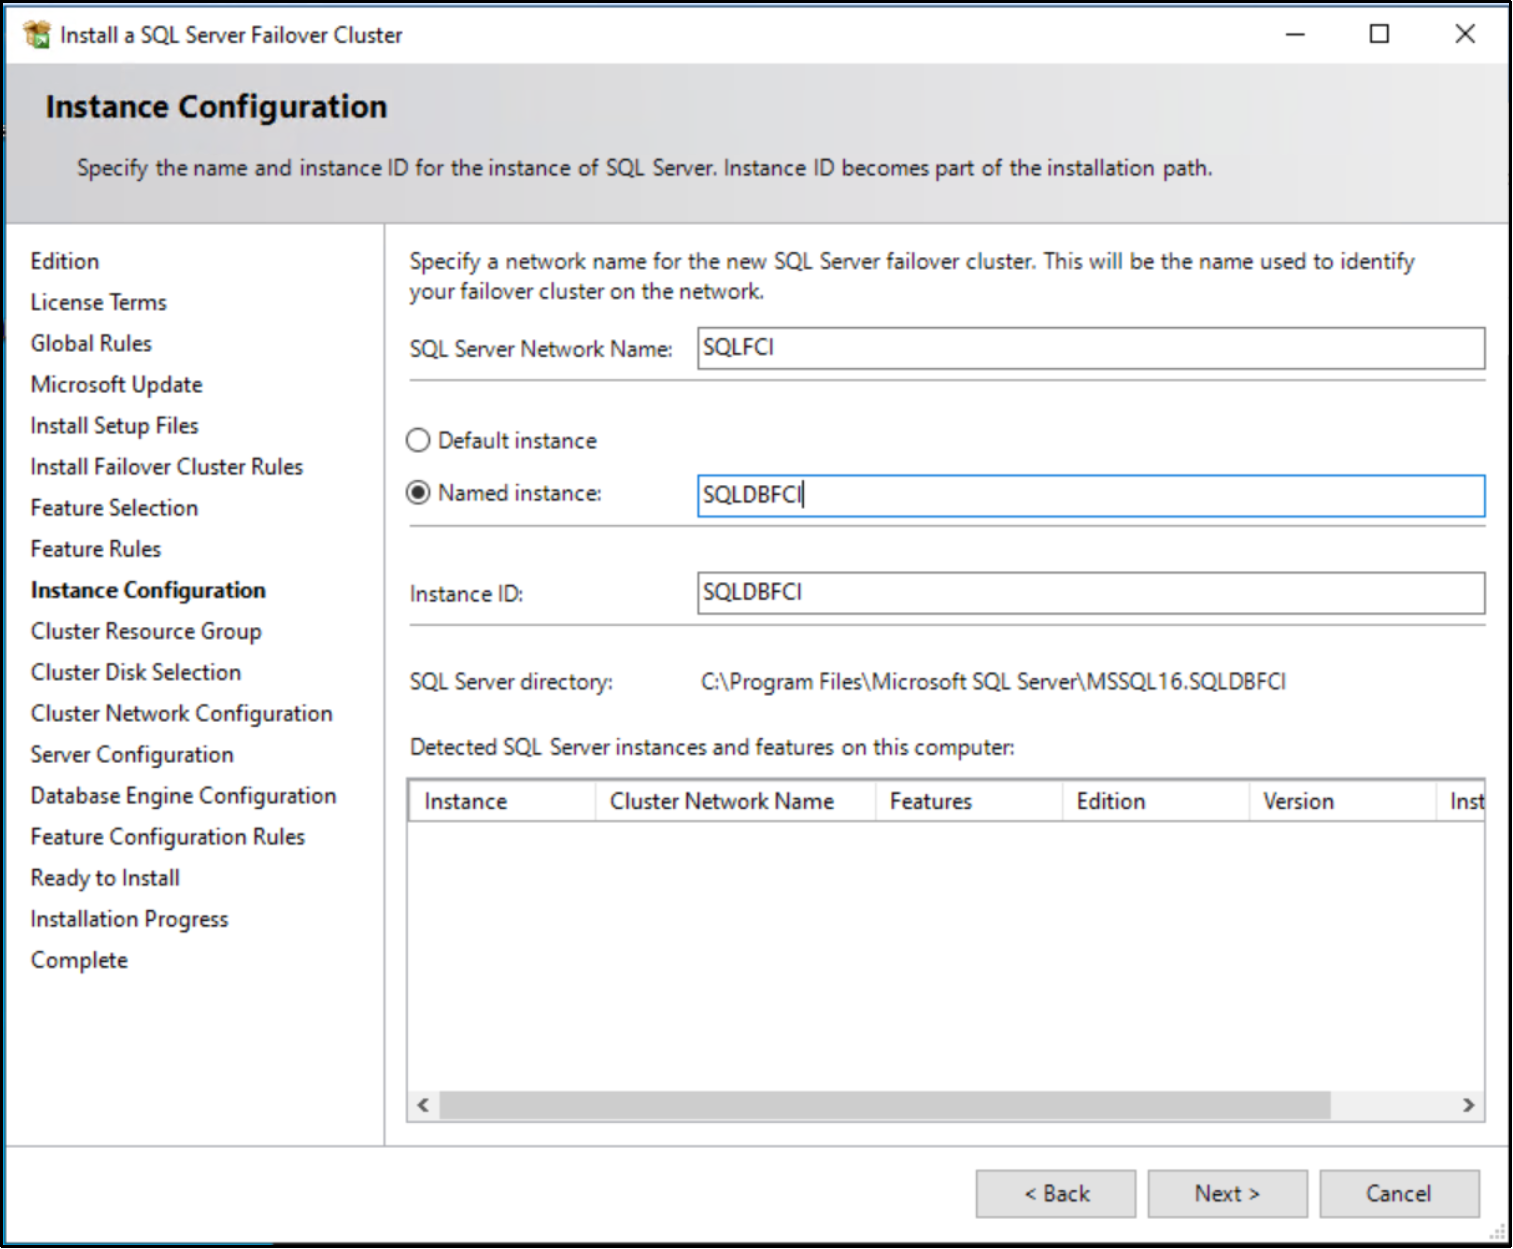 This figure shows the instance configuration to install a SQL Server Failover Cluster.